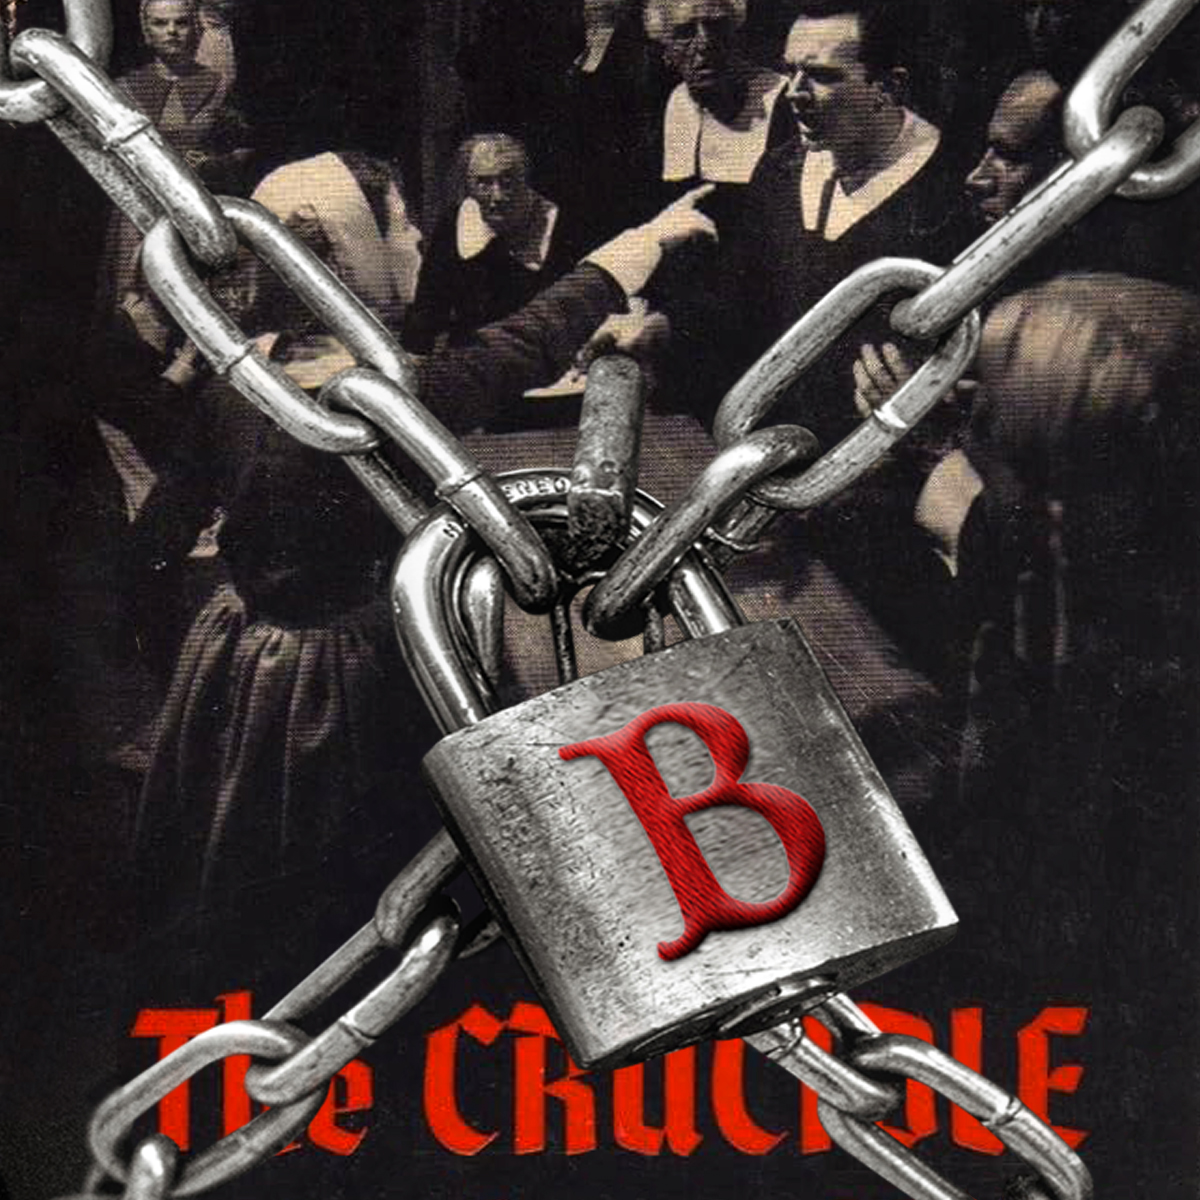 Cover of The Crucible with a lock and chain